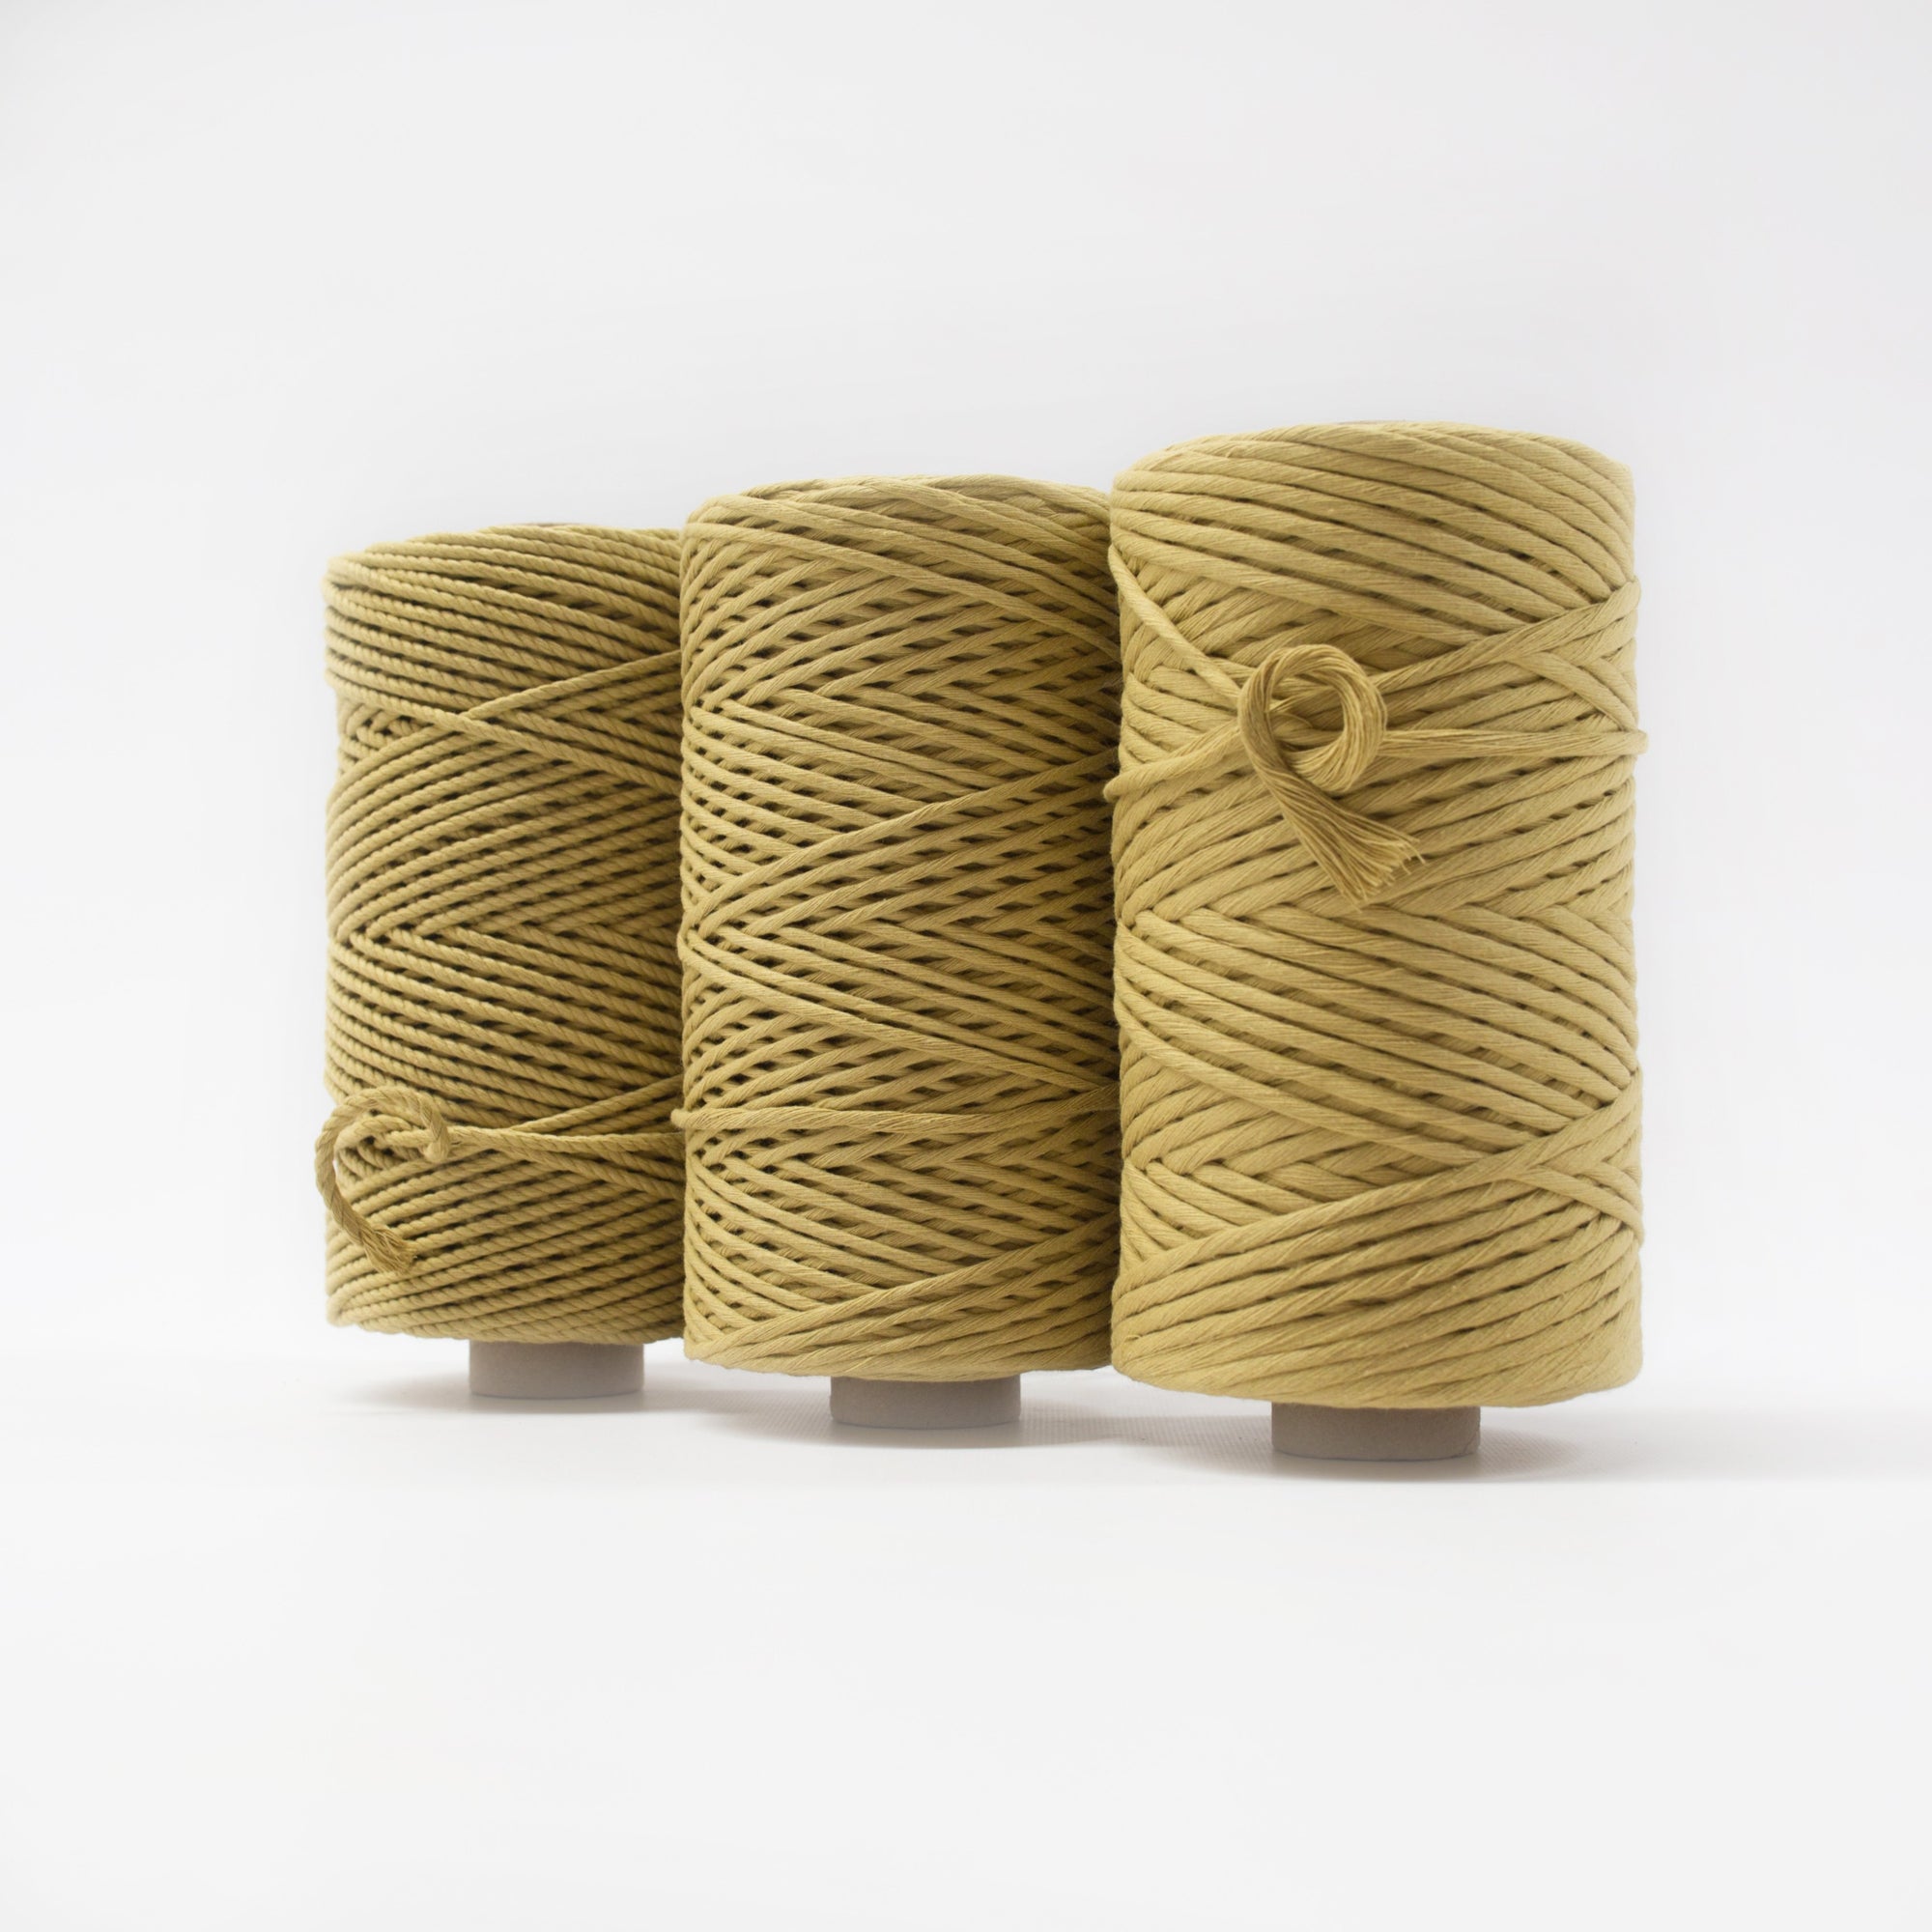 Mary Maker Studio Luxe Colour Cotton 4mm 1KG Recycled Luxe Macrame Rope // Antique Gold macrame cotton macrame rope macrame workshop macrame patterns macrame